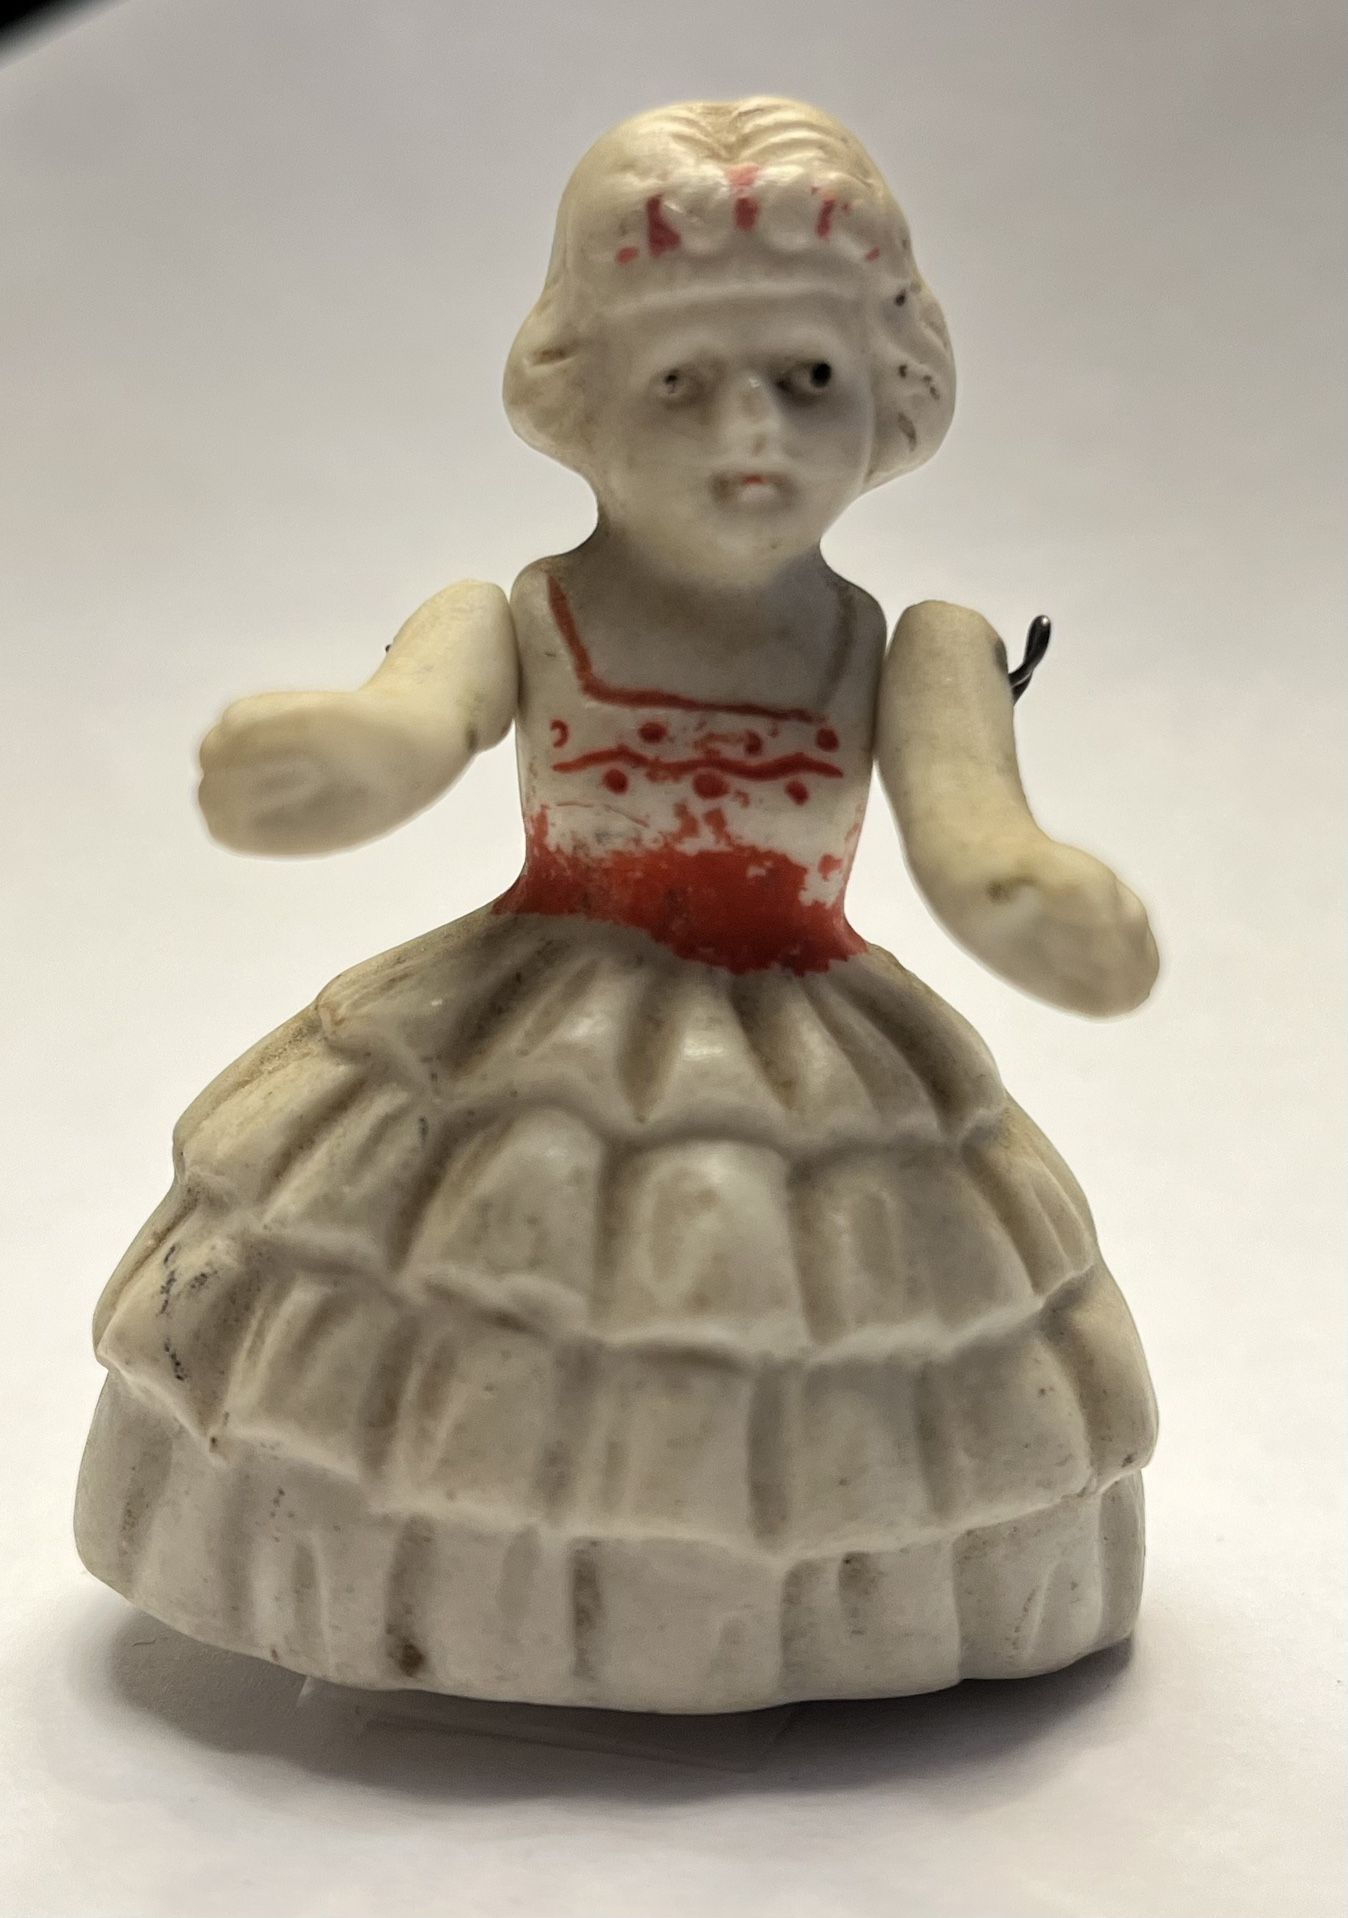 Antique Porcelain 2.5” X 1.75” Doll With Wire Attached Arms. Early 1900S.